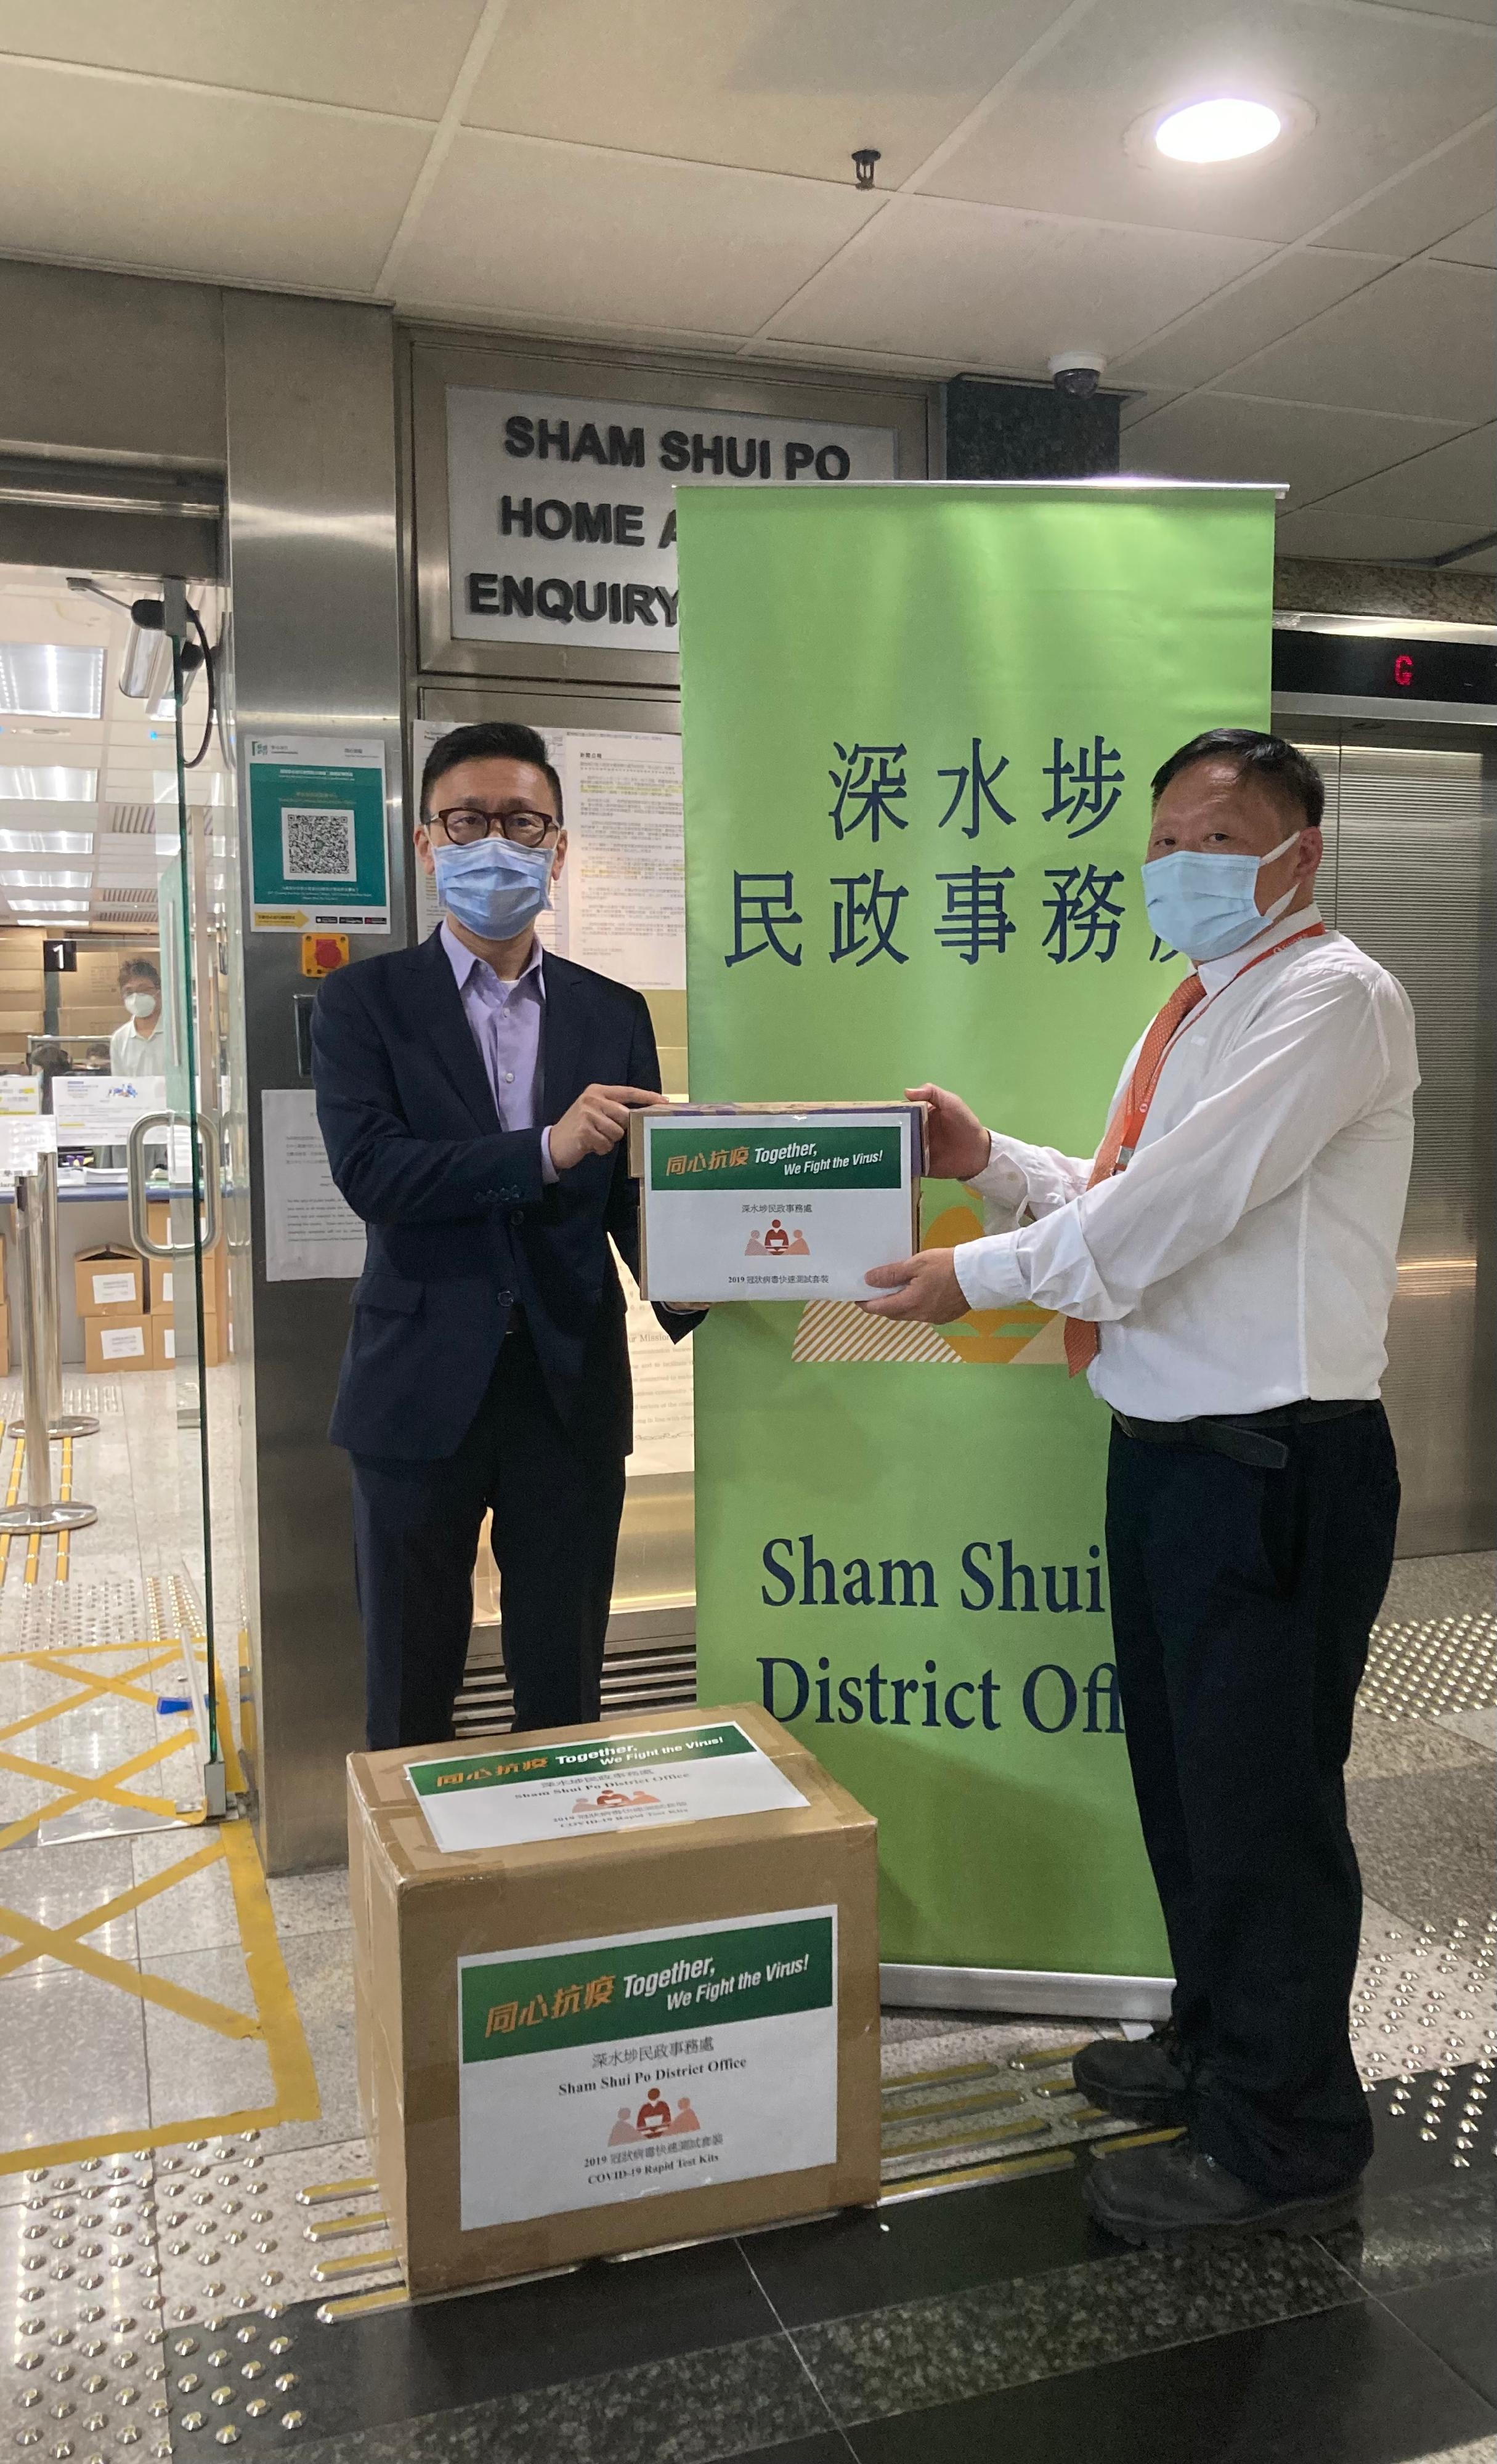 The Sham Shui Po District Office today (May 3) distributed COVID-19 rapid test kits to households, cleansing workers and property management staff living and working in Dynasty Heights for voluntary testing through the property management company.